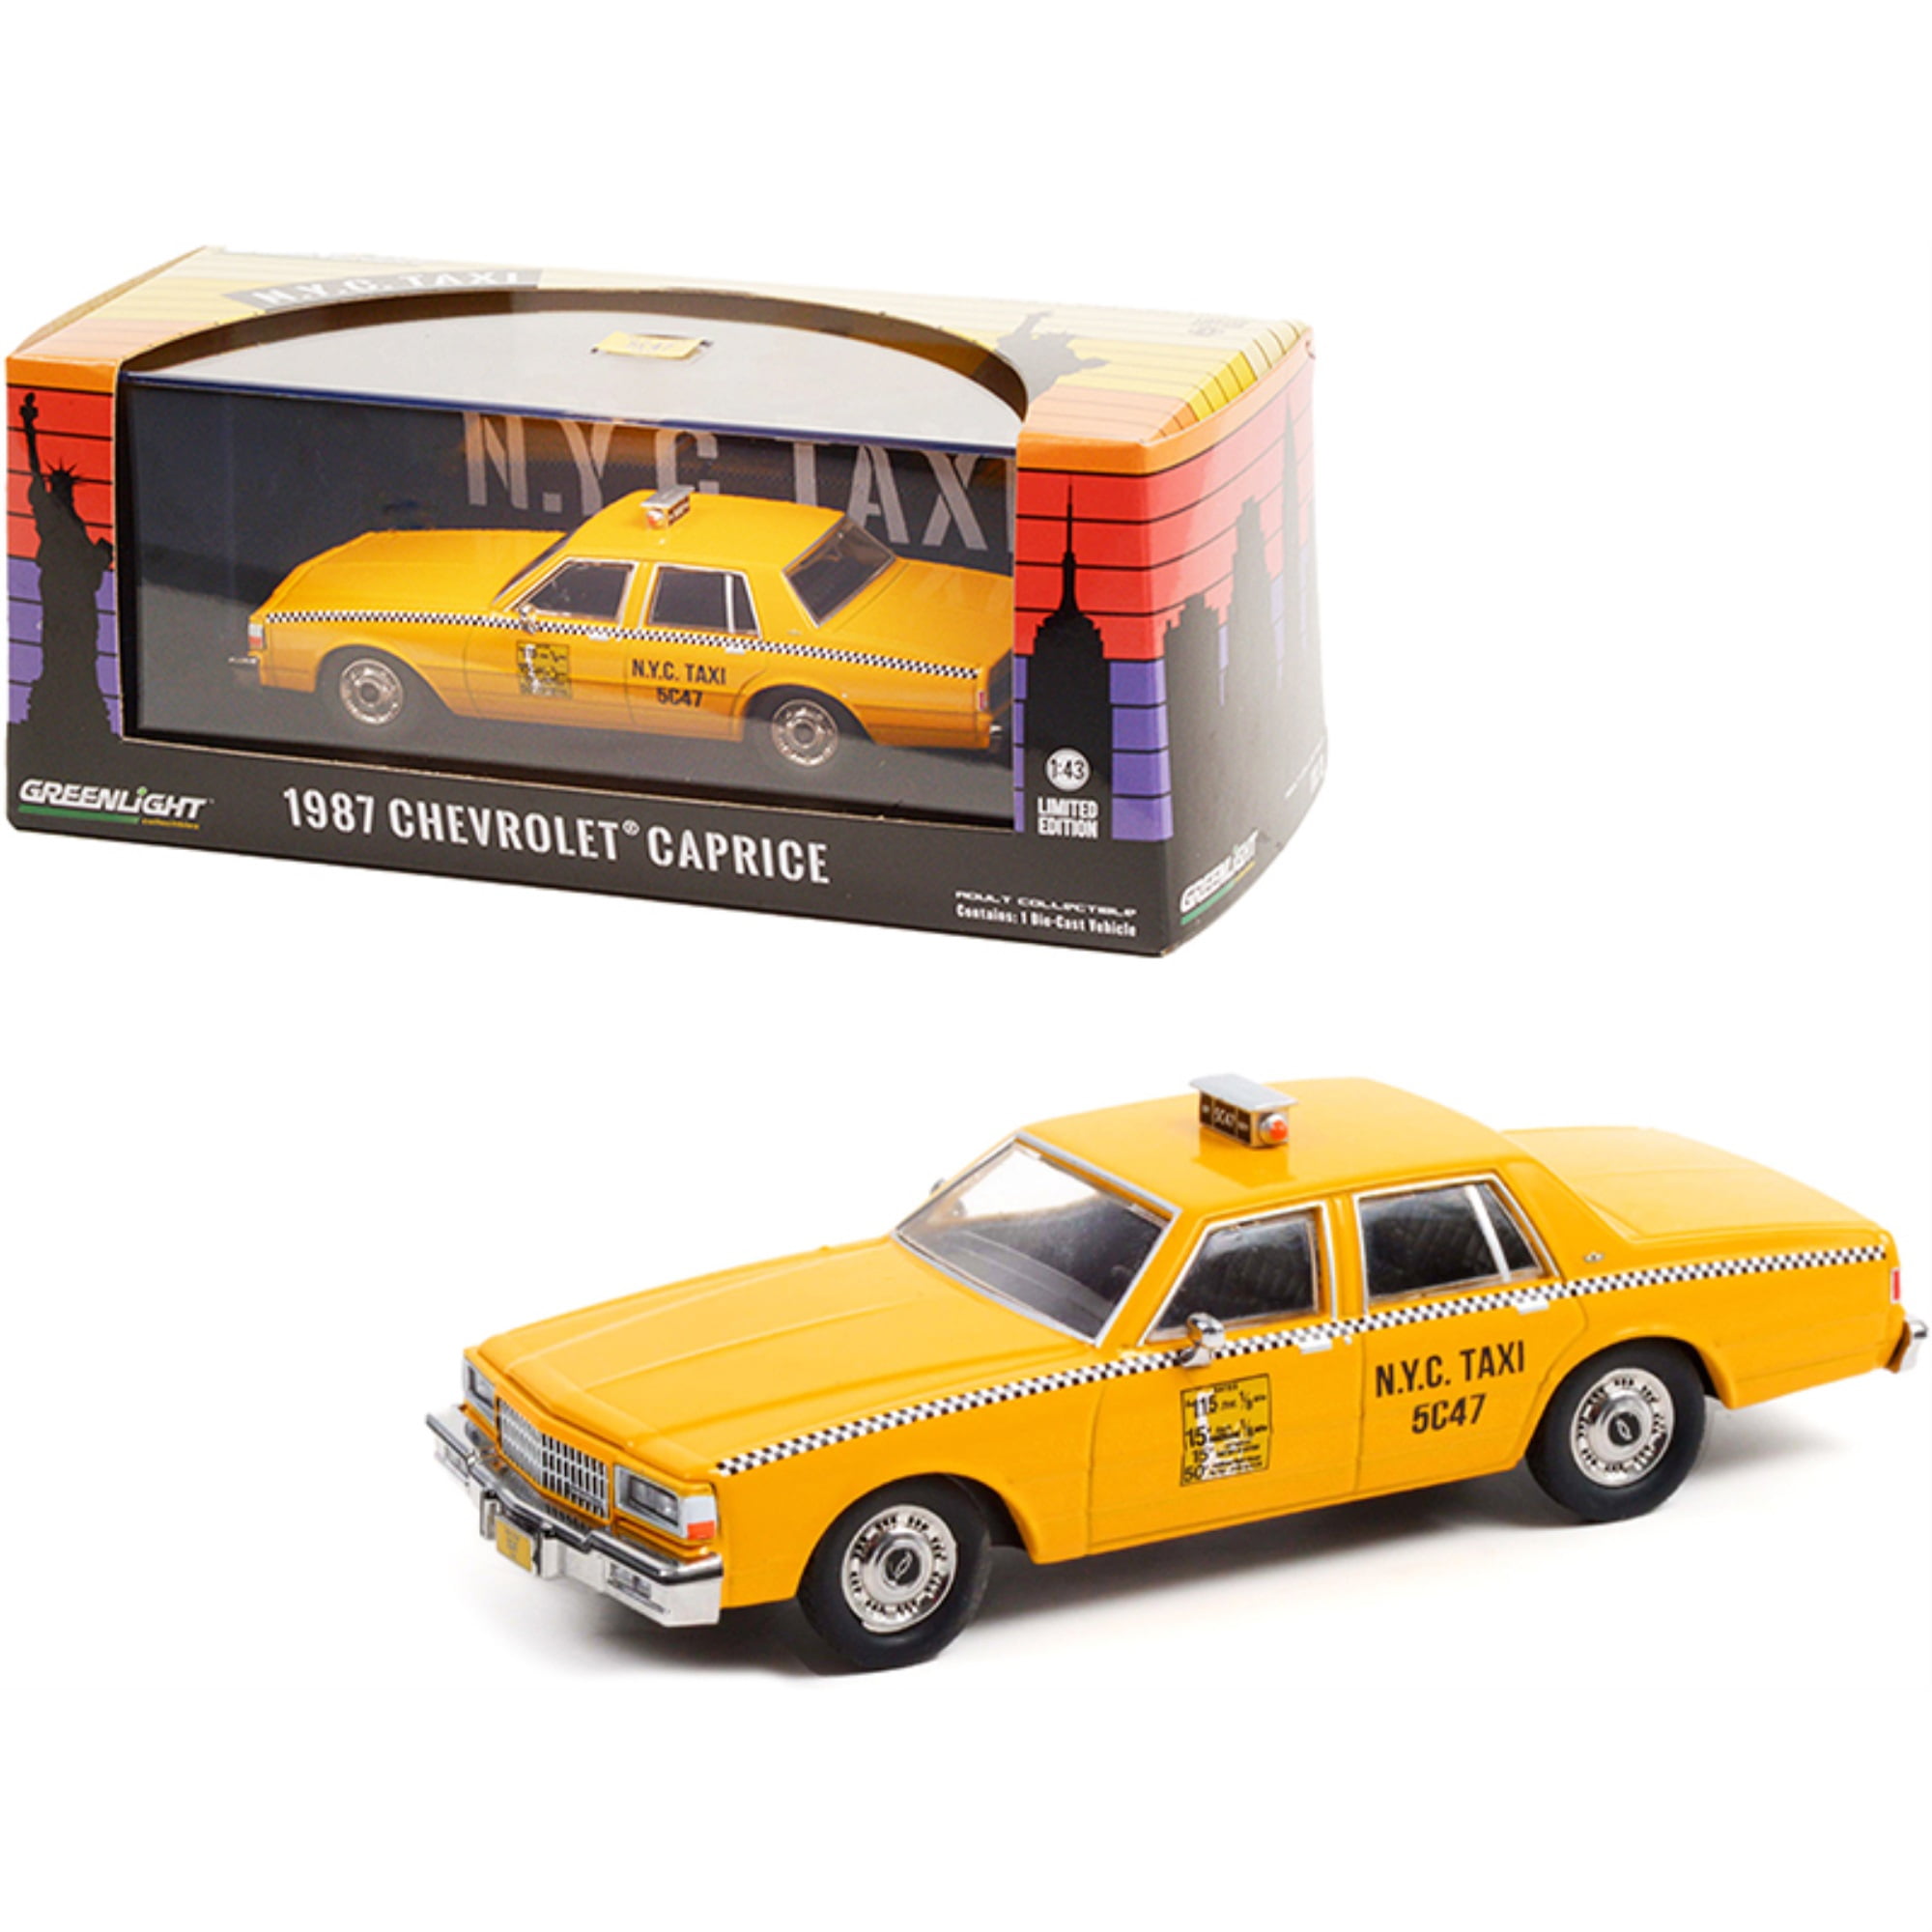 86611 1-43 Scale 1987 Chevrolet Caprice N.Y.C. Taxi Diecast Model Car, Yellow -  GreenLight